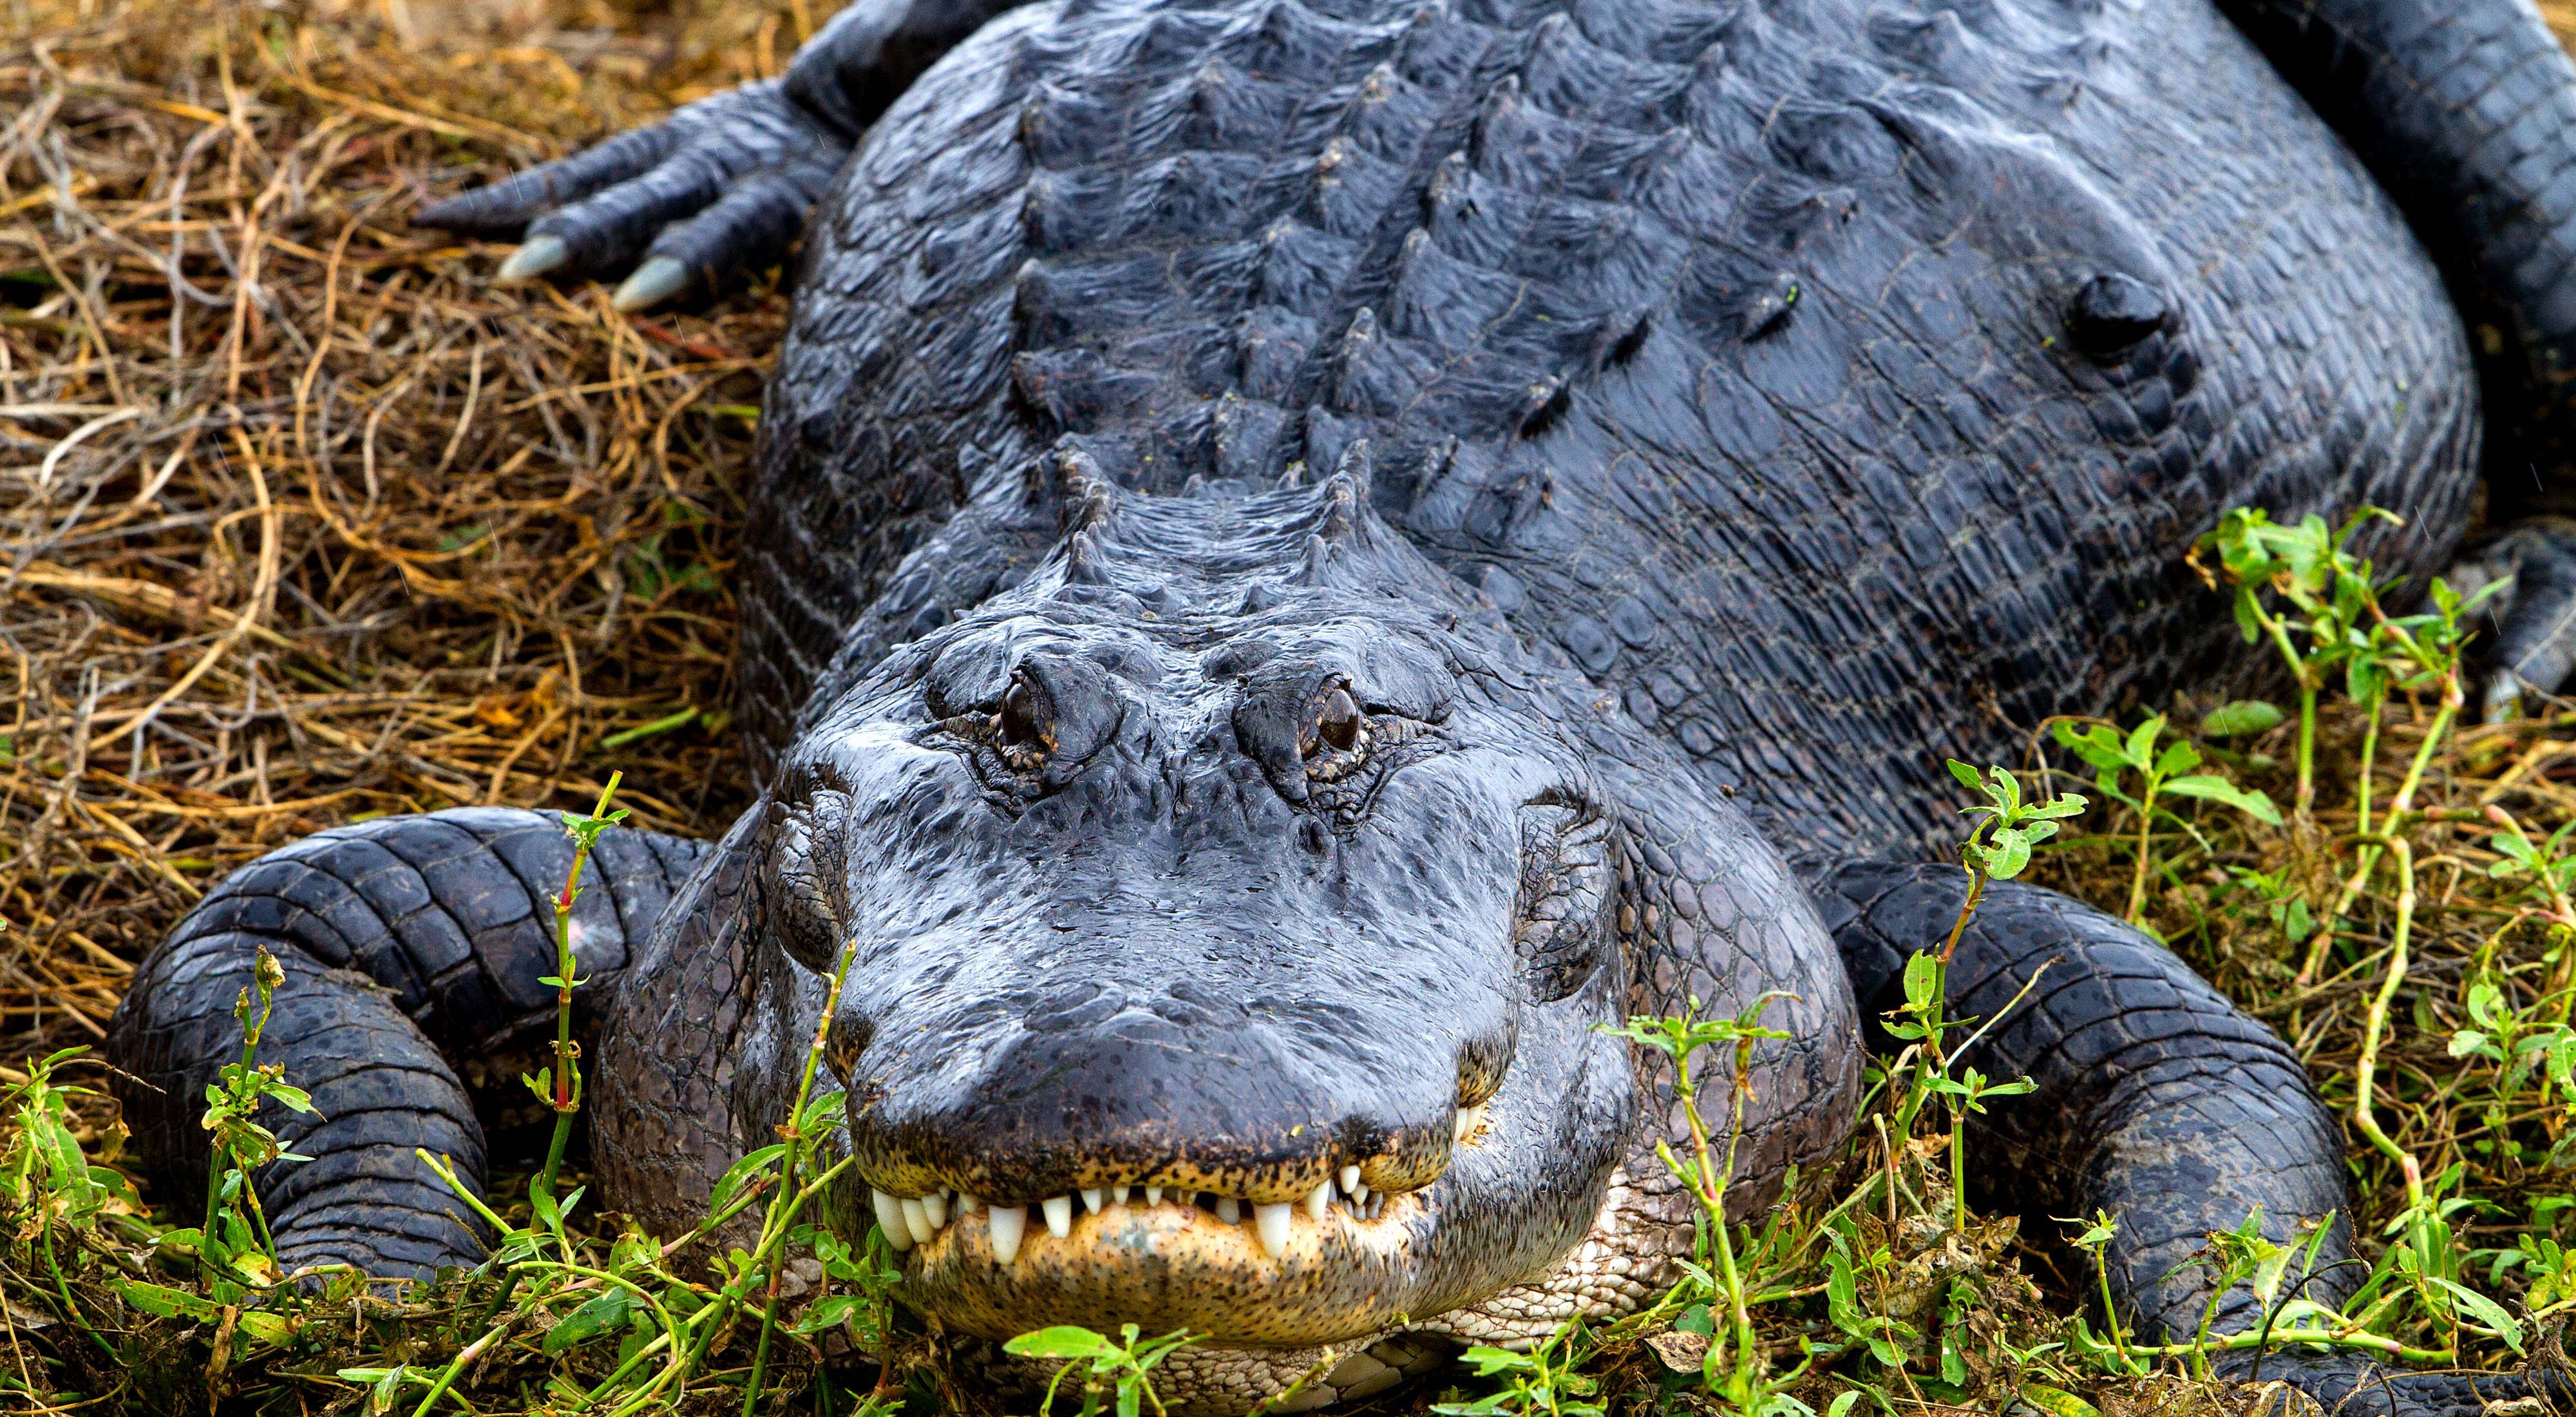 Why Are Alligators Protected?